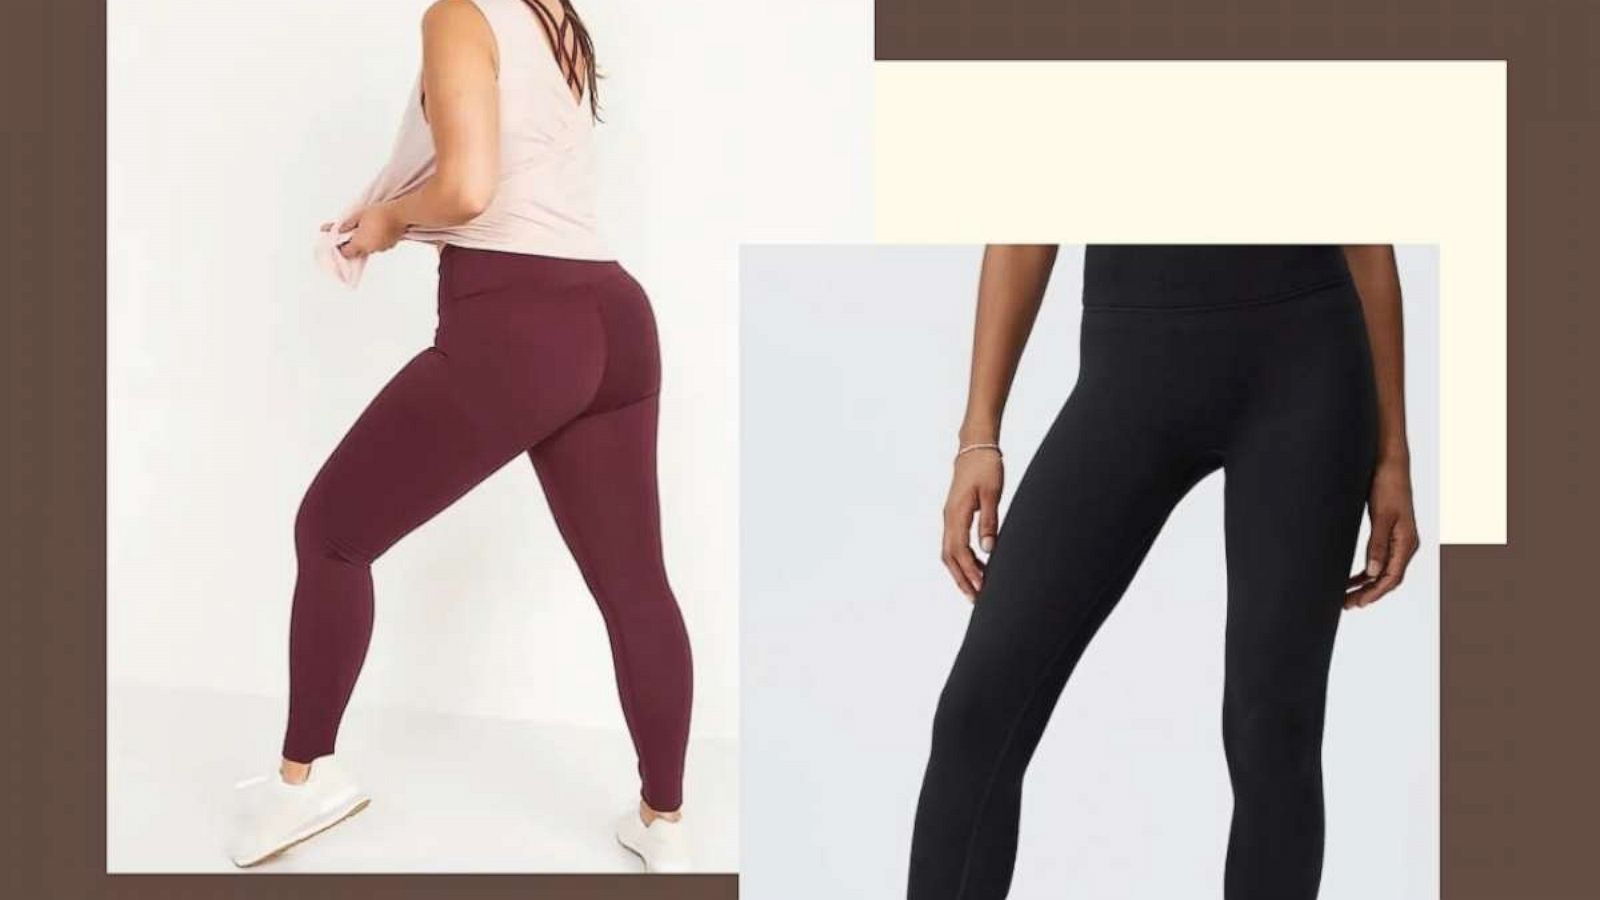 Where Can I Find Thick Leggings? – solowomen